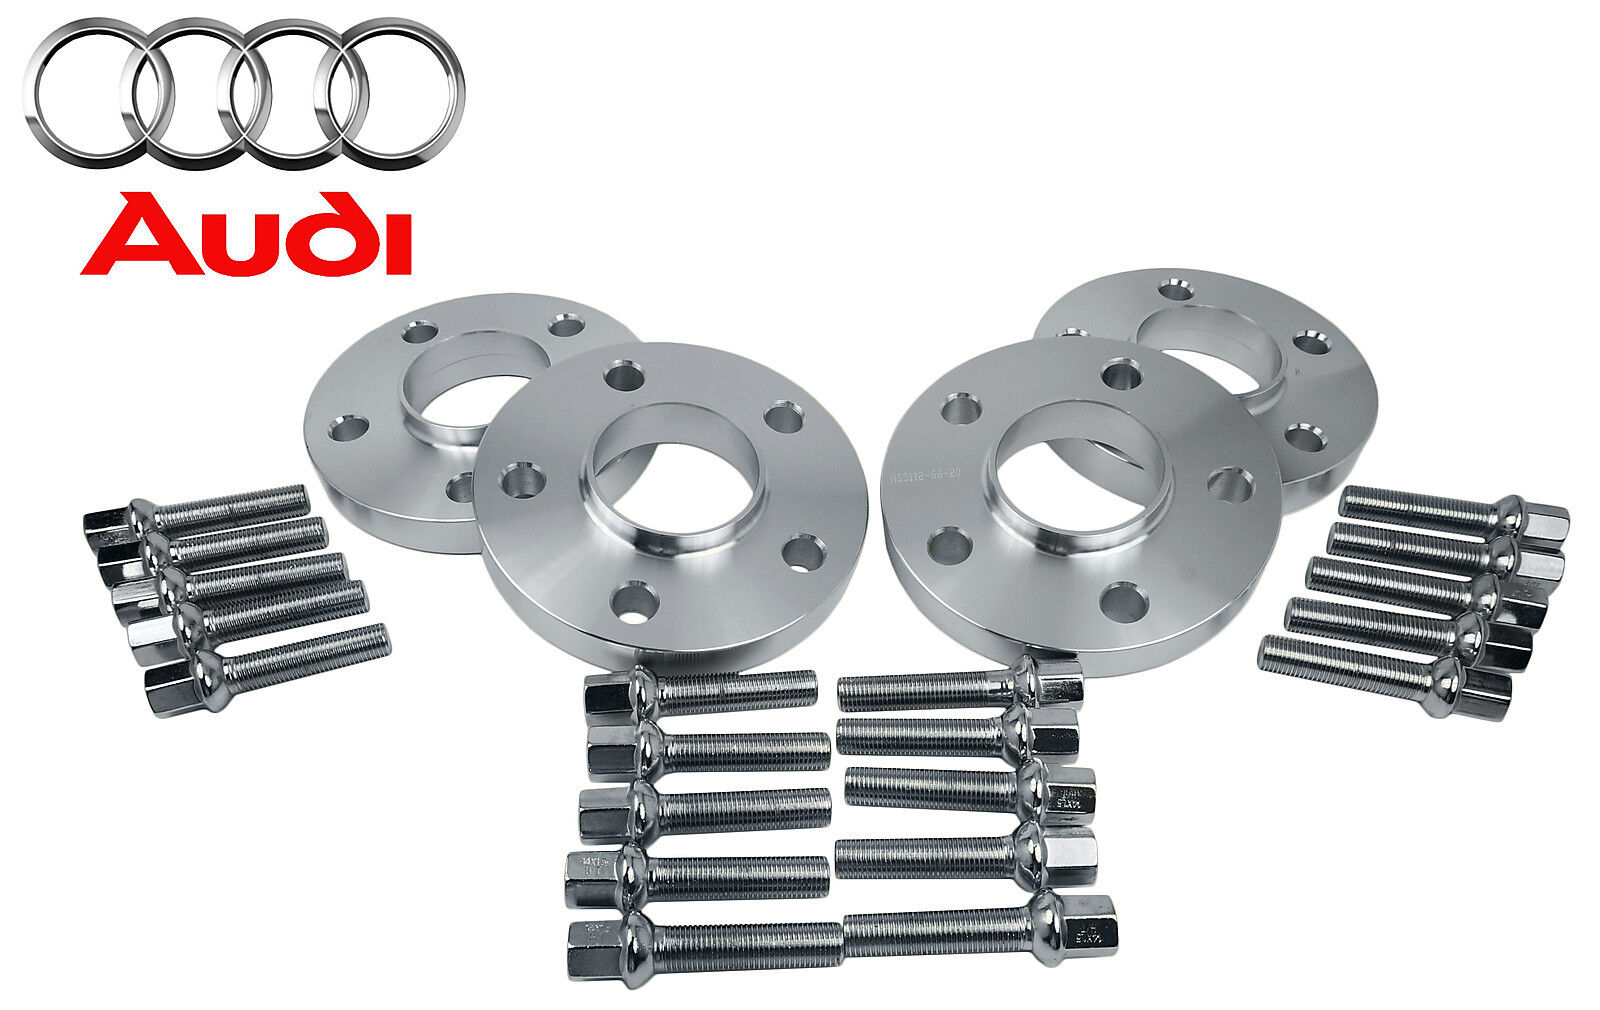 Audi Hub Centric Wheel Spacers Kit (2) 12mm & (2) 15mm Fits: A4 & S4 2009-2014